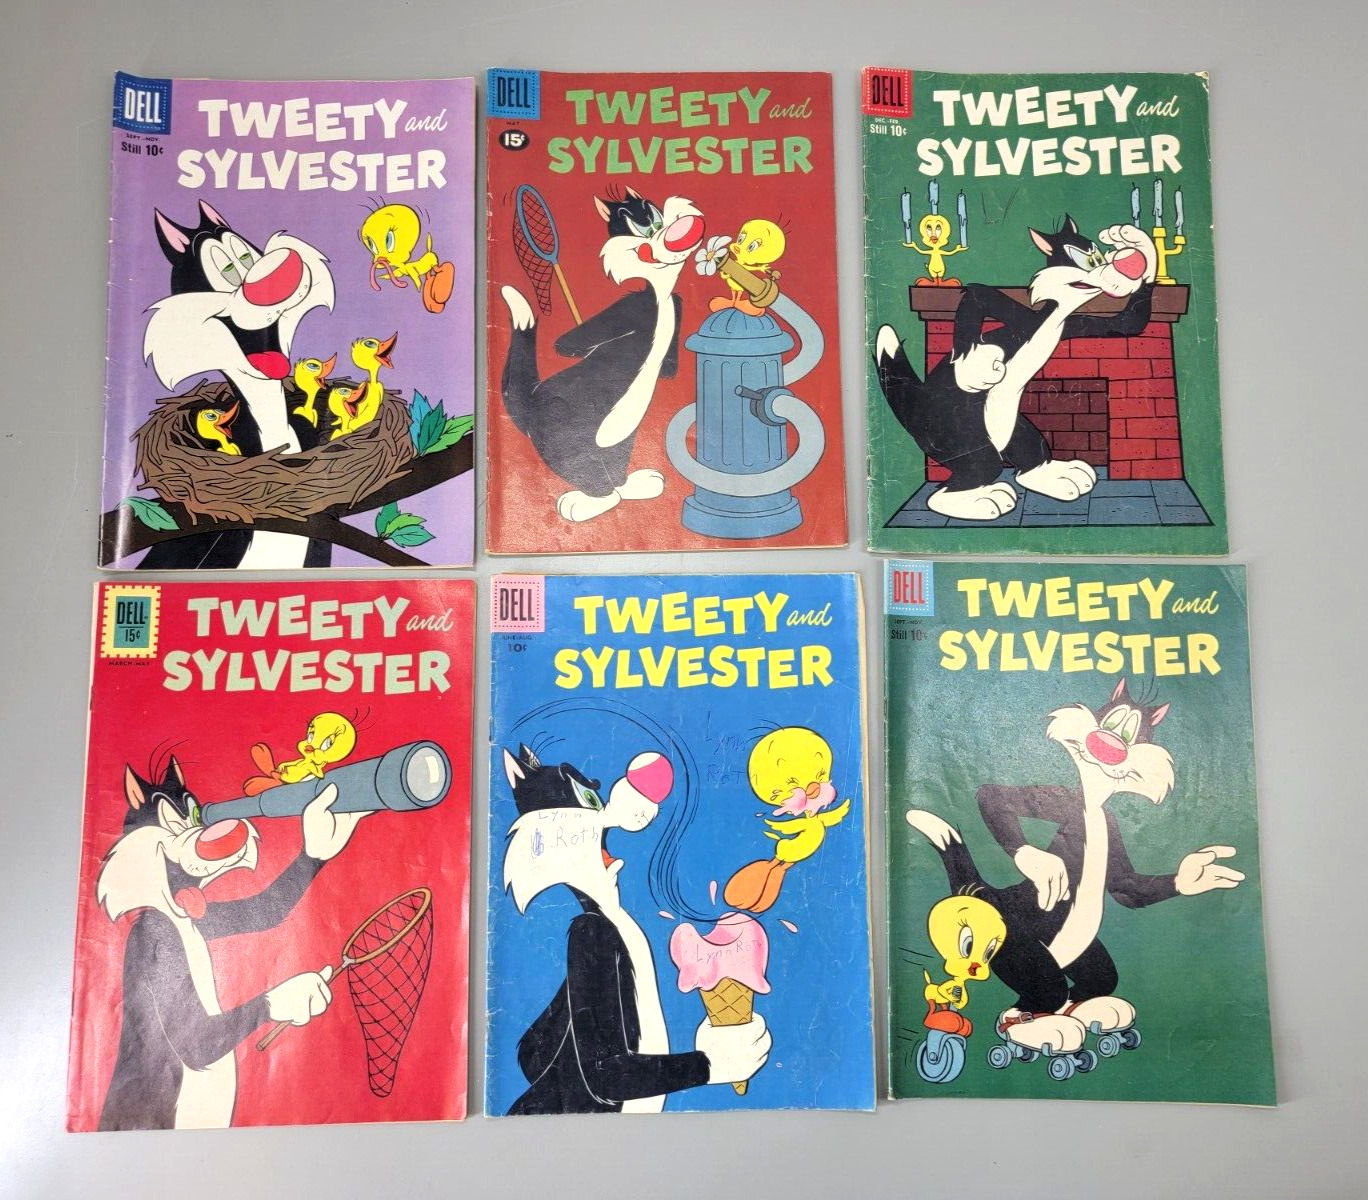 Lot 6 Vintage Dell Comics Books Tweety and Sylvester, 1950\'s/1960\'s